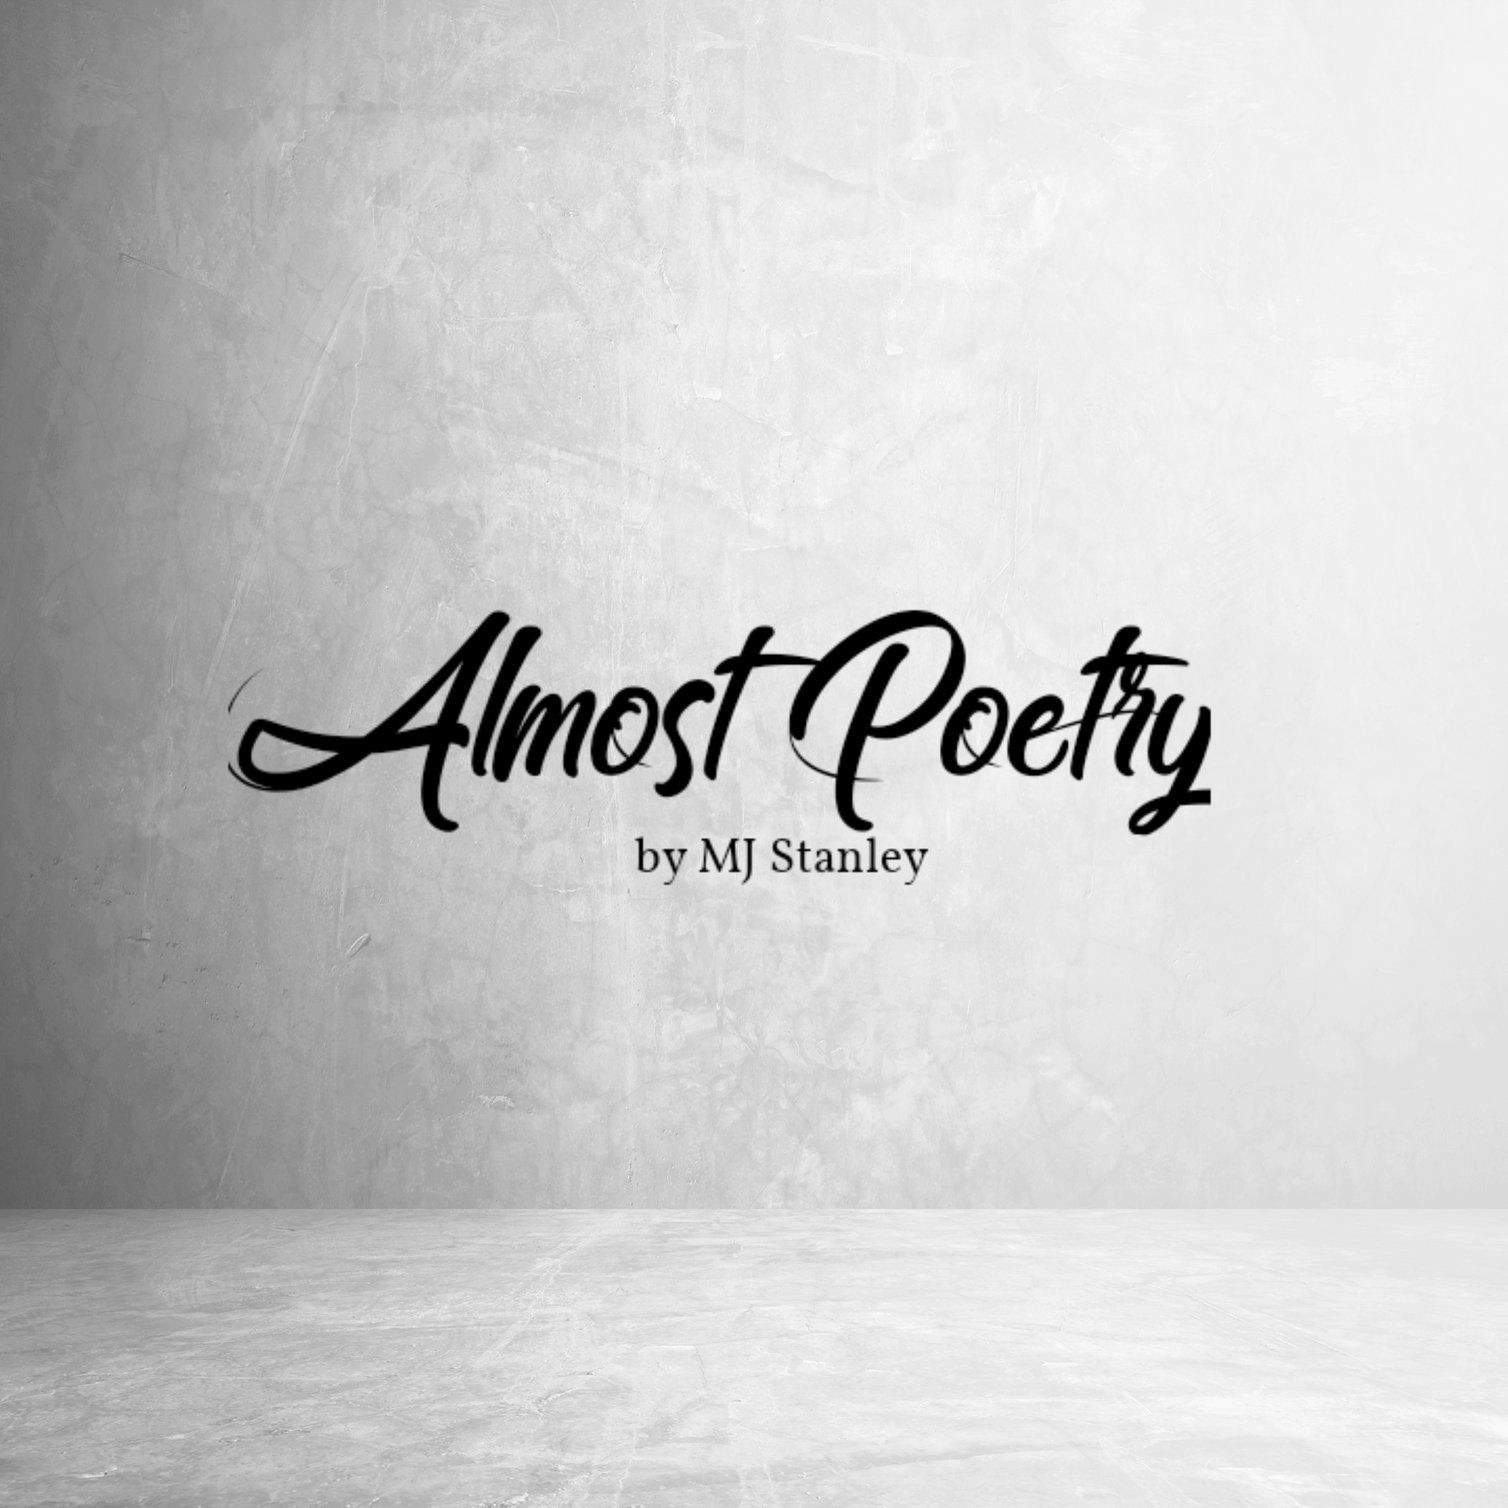 Almost Poetry